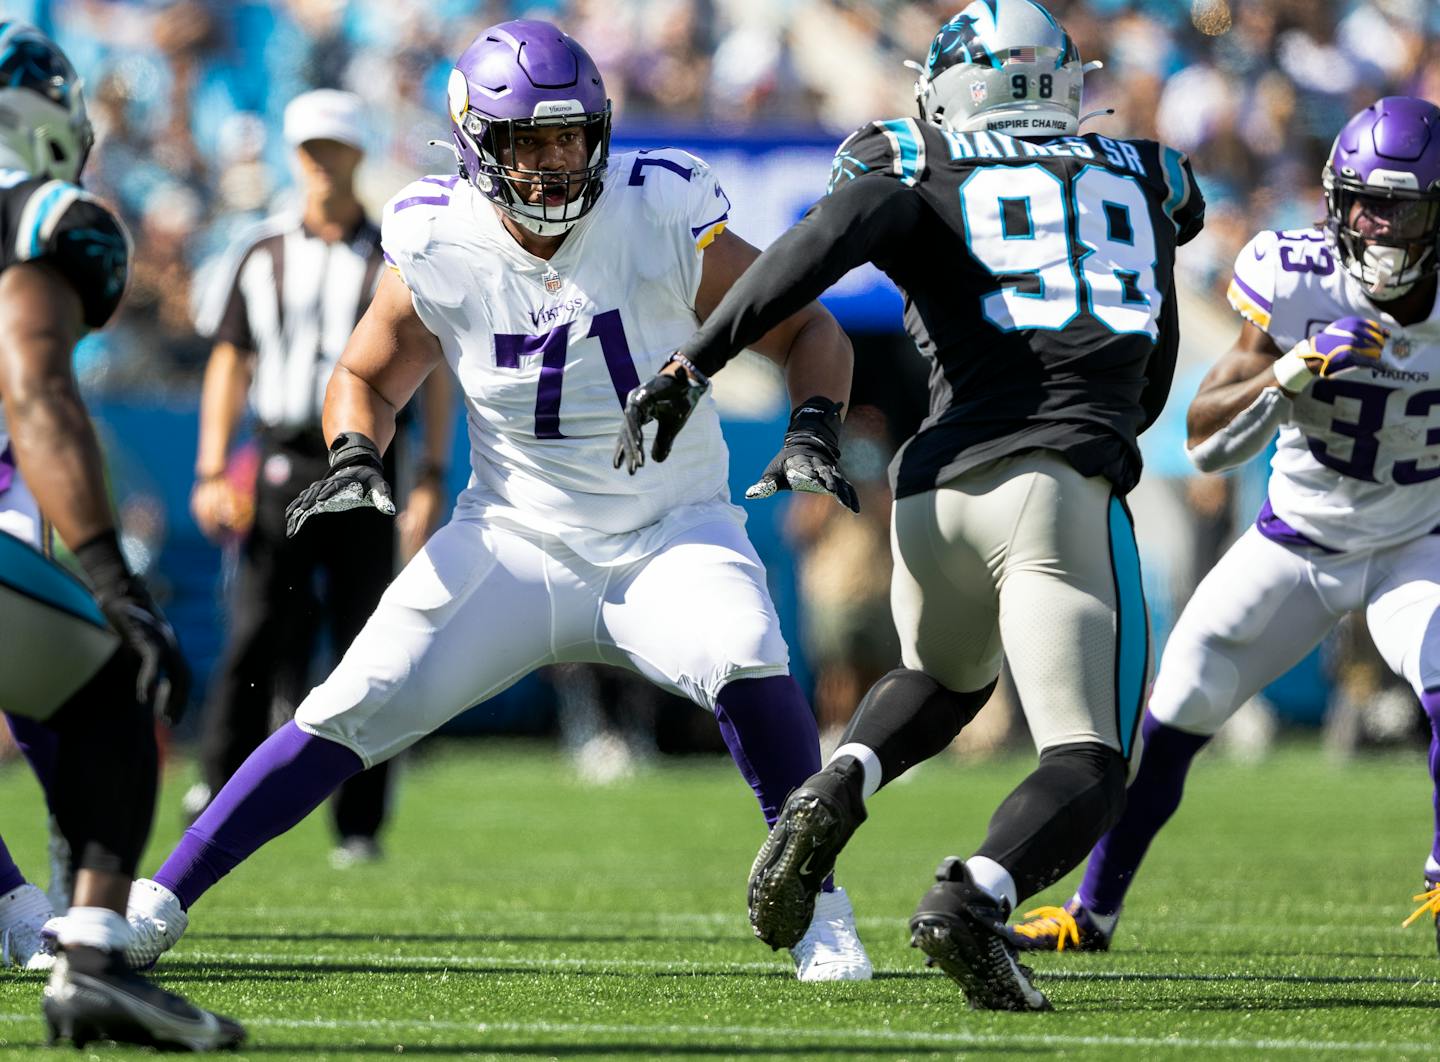 Christian Darrisaw takes his long-awaited place as Vikings left tackle